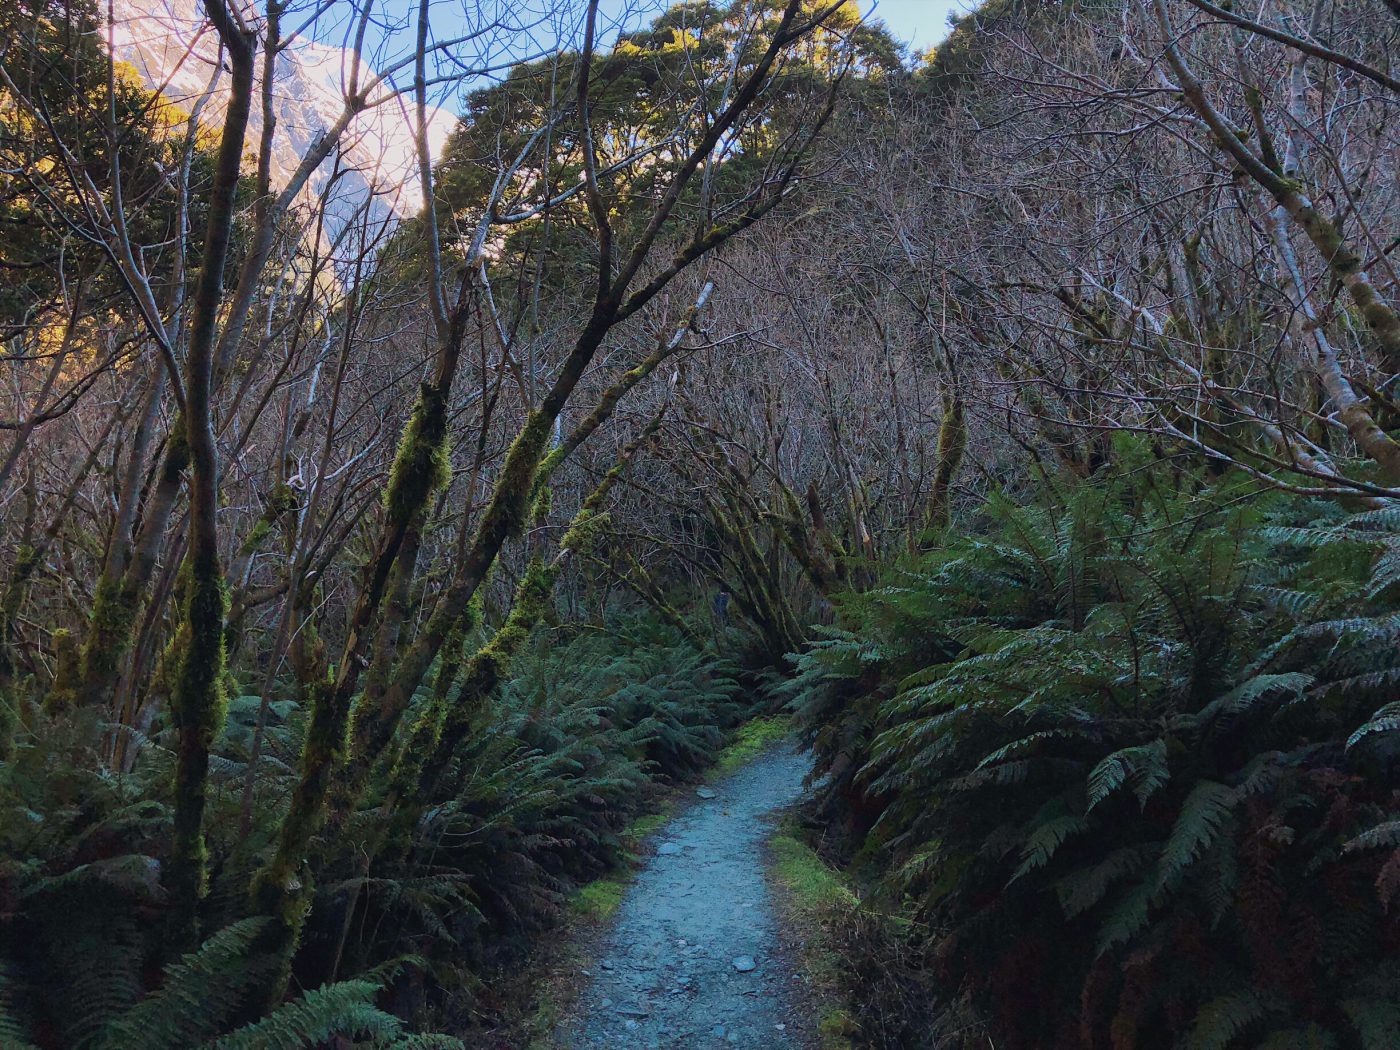 Rob Roy Glacier Track: Grimm's Fairytale or Lord of the rings?